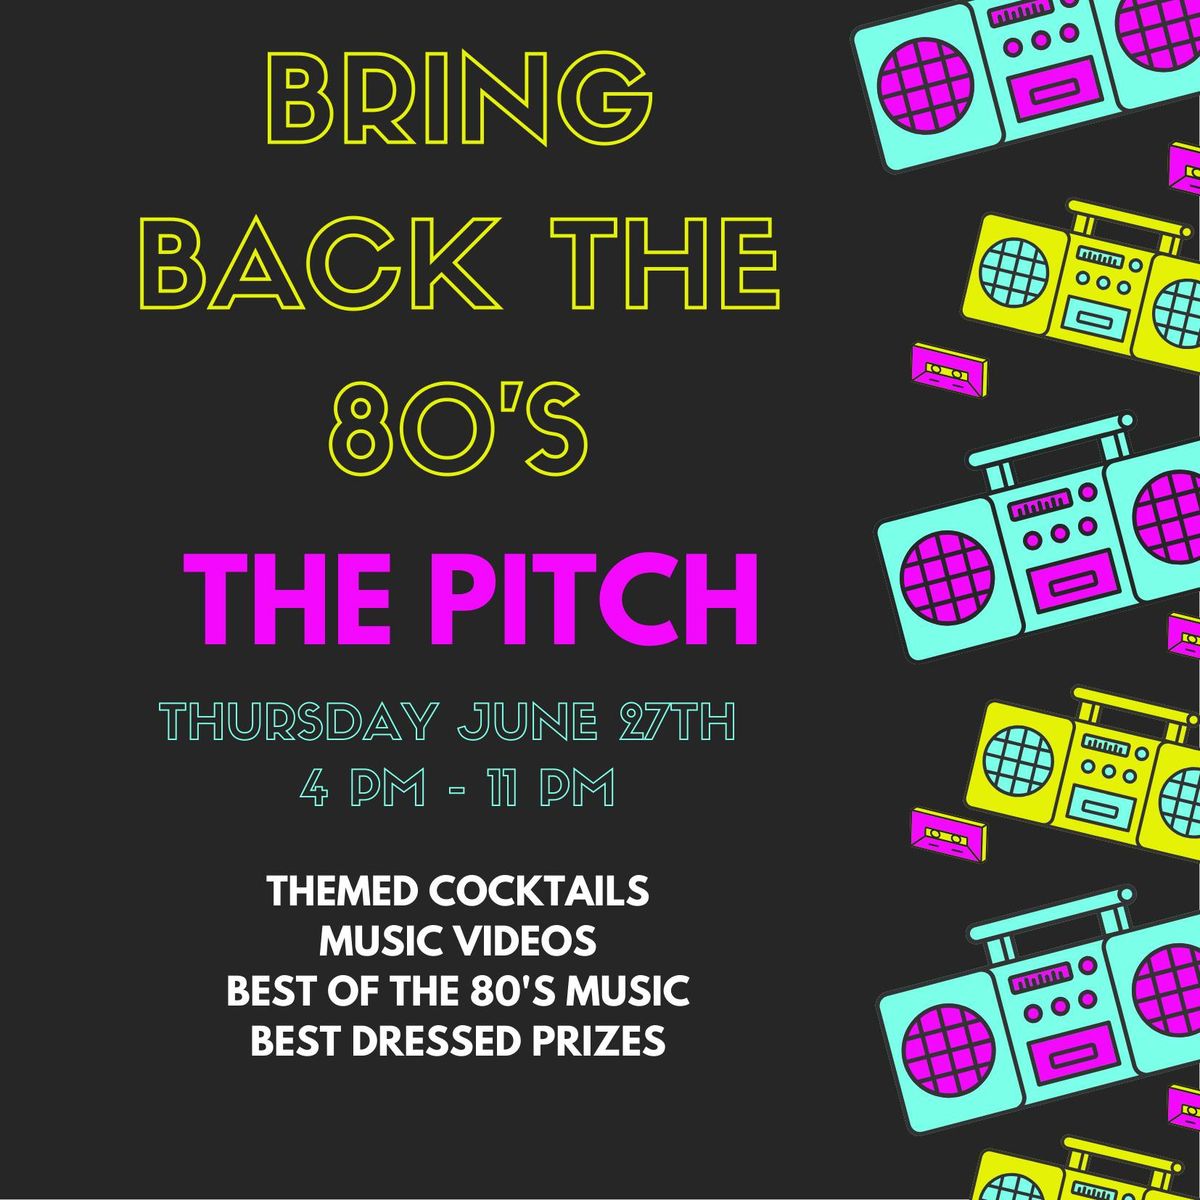 Bring Back the 80's on The Pitch